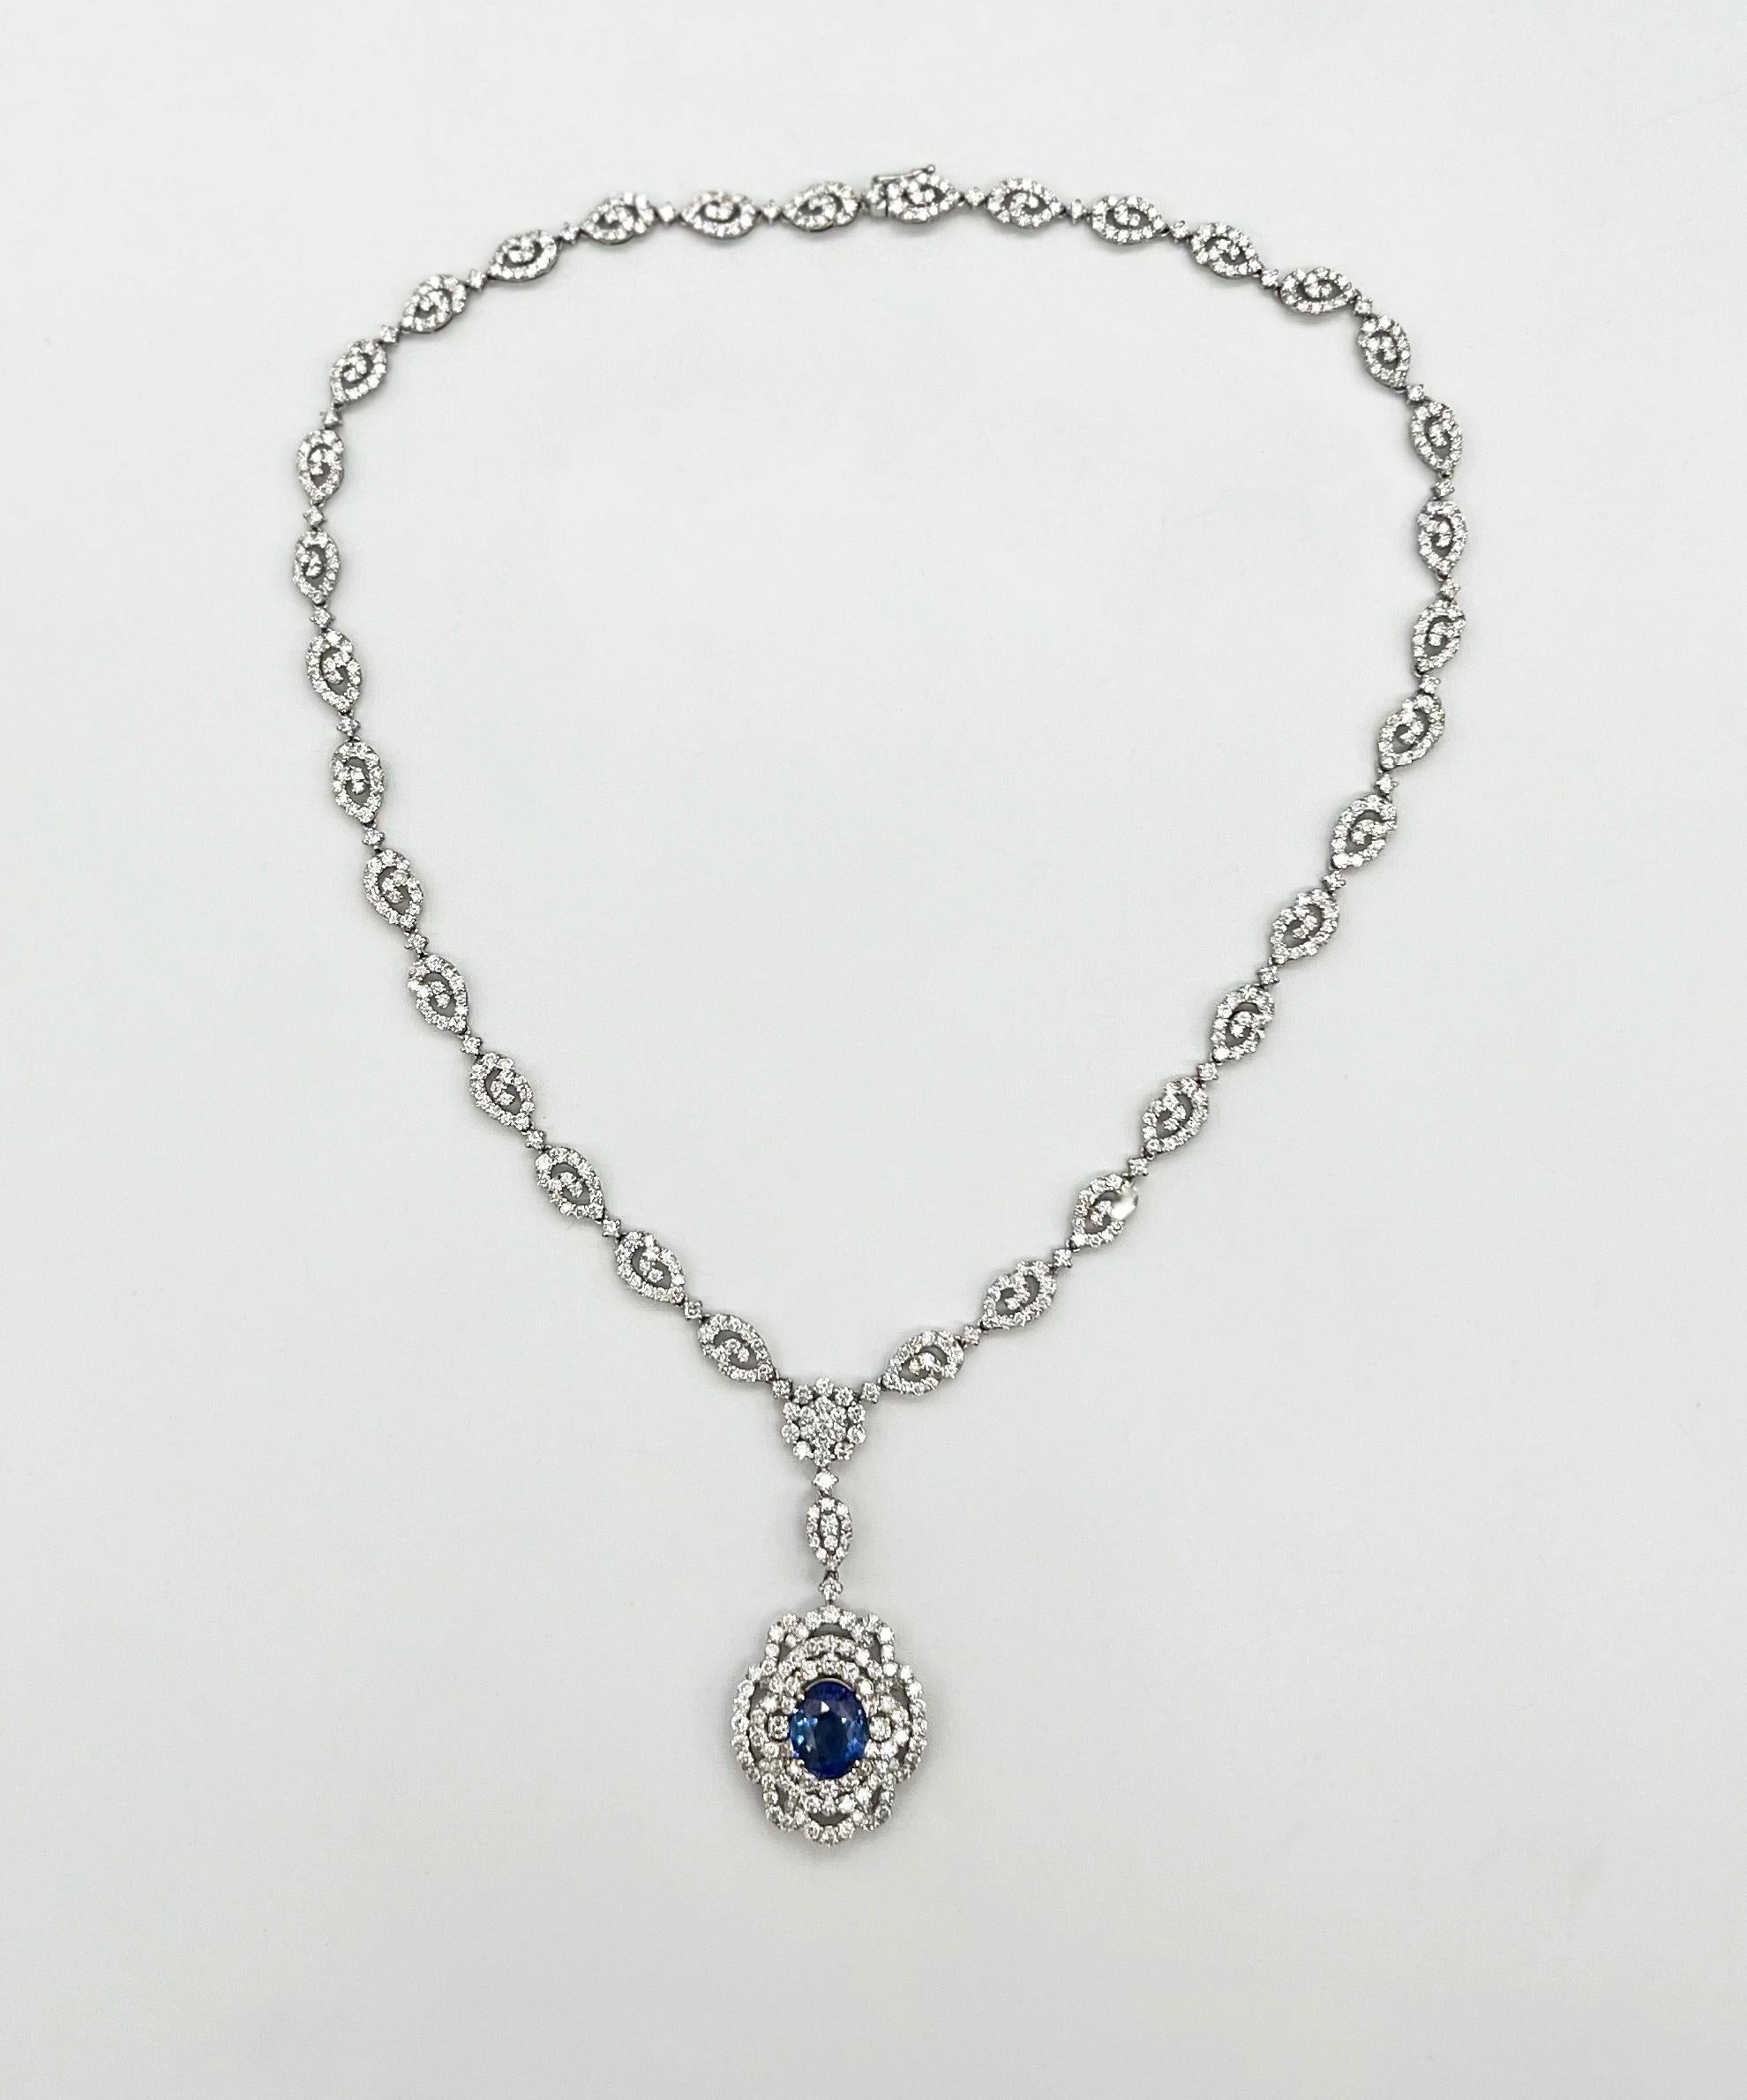 Oval Cut Handmade 17.17 Total Carat Sapphire and Diamond White Gold Pendant Necklace, GIA For Sale